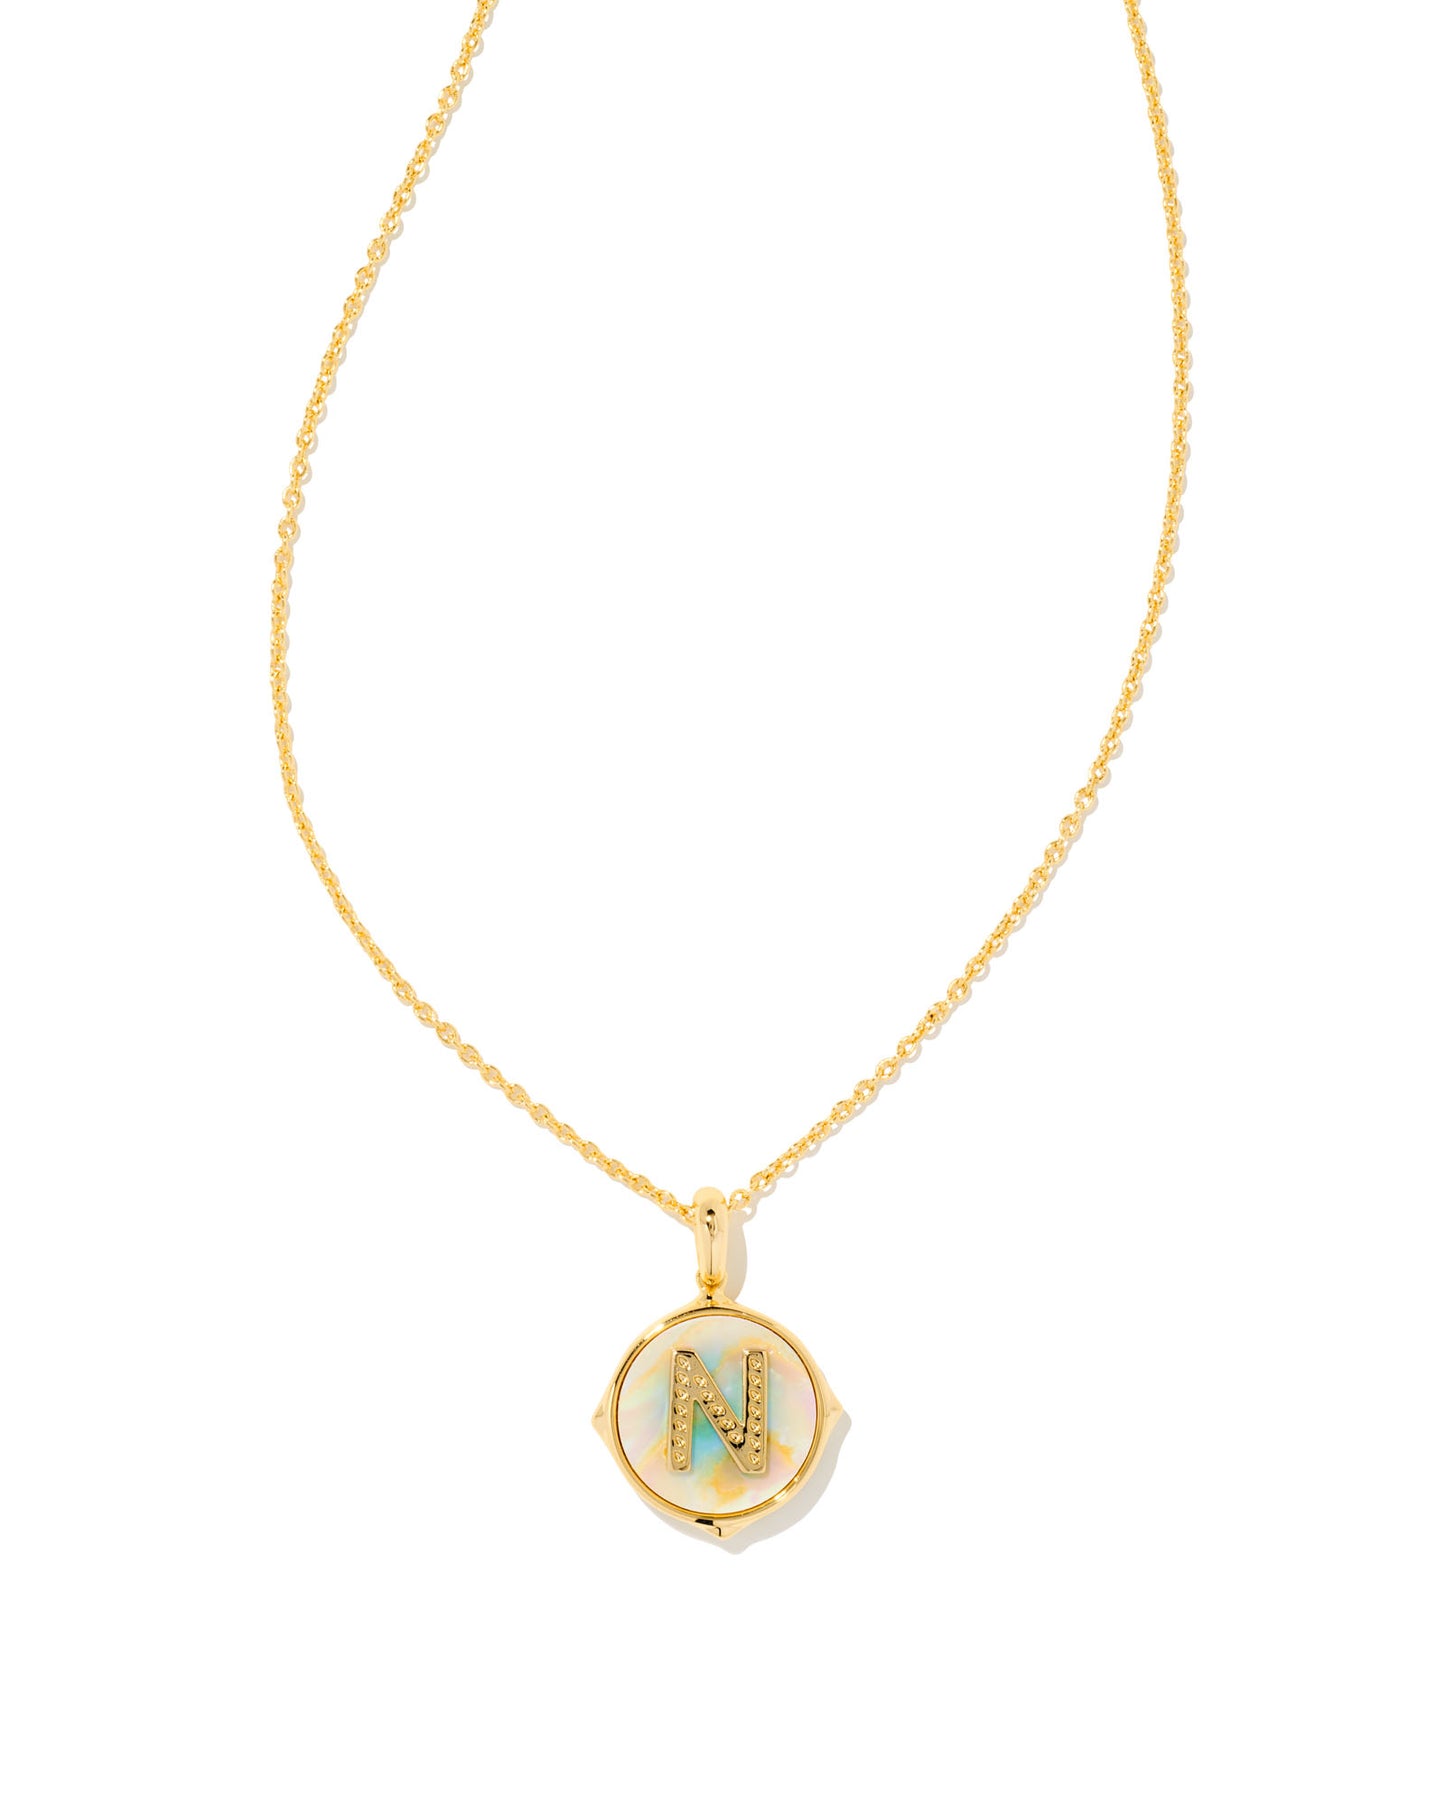 KENDRA SCOTT: Letter Disc Pendant Necklace in Gold/Iridescent Abalone